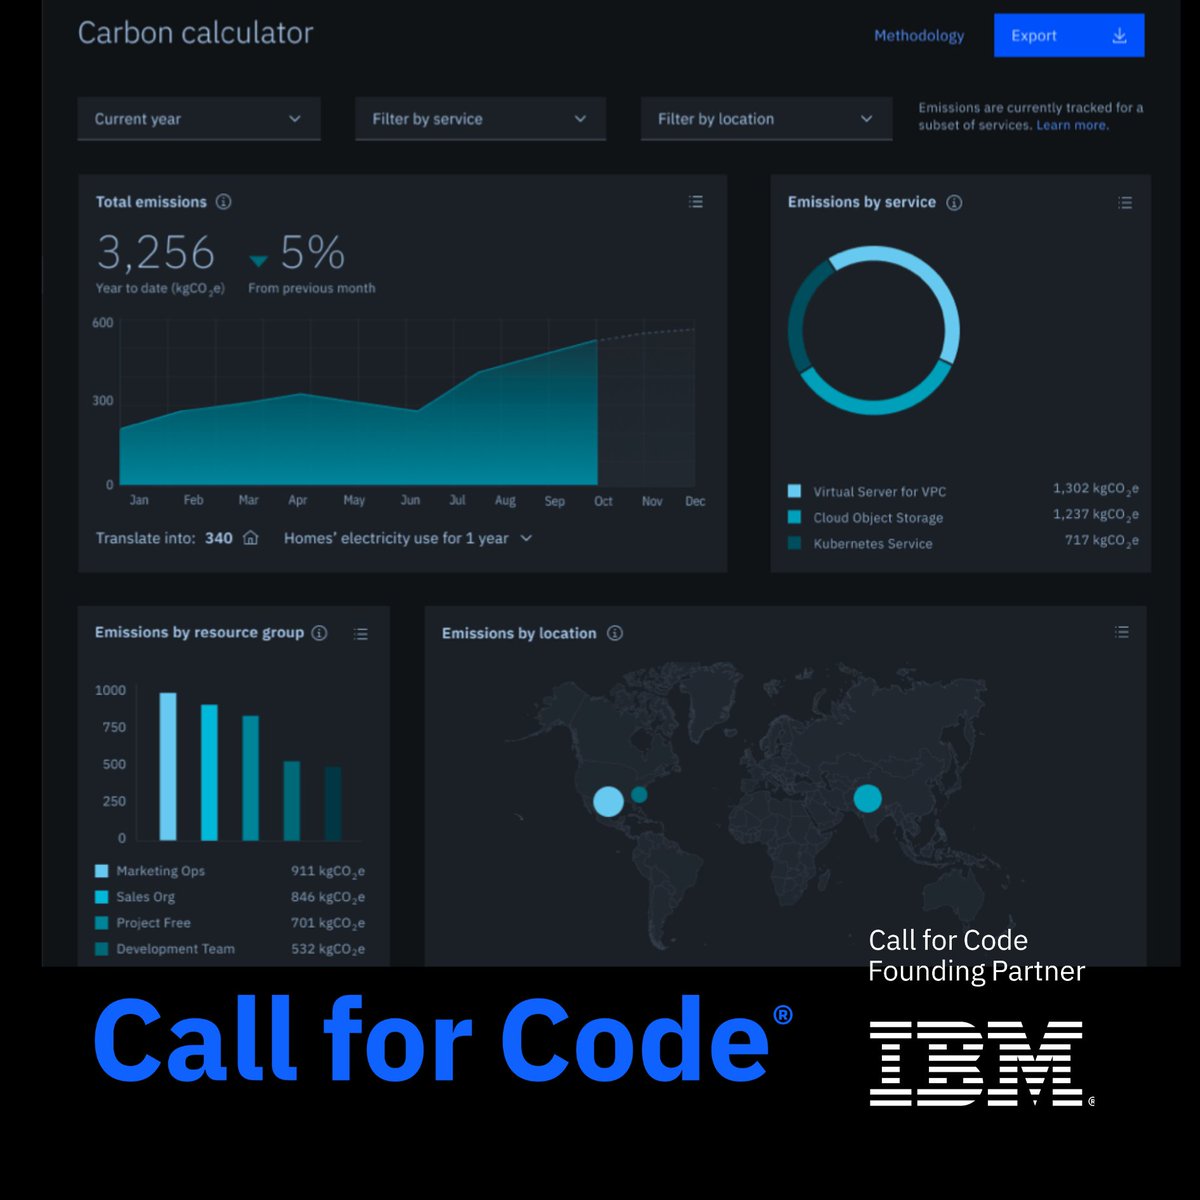 Meet sustainability goals with a standards-based, AI-driven dashboard that tracks cloud emissions. Are you ready to answer the call? Explore the resources available: bit.ly/4b0uXNk #TechforGood #IBM #CallforCode